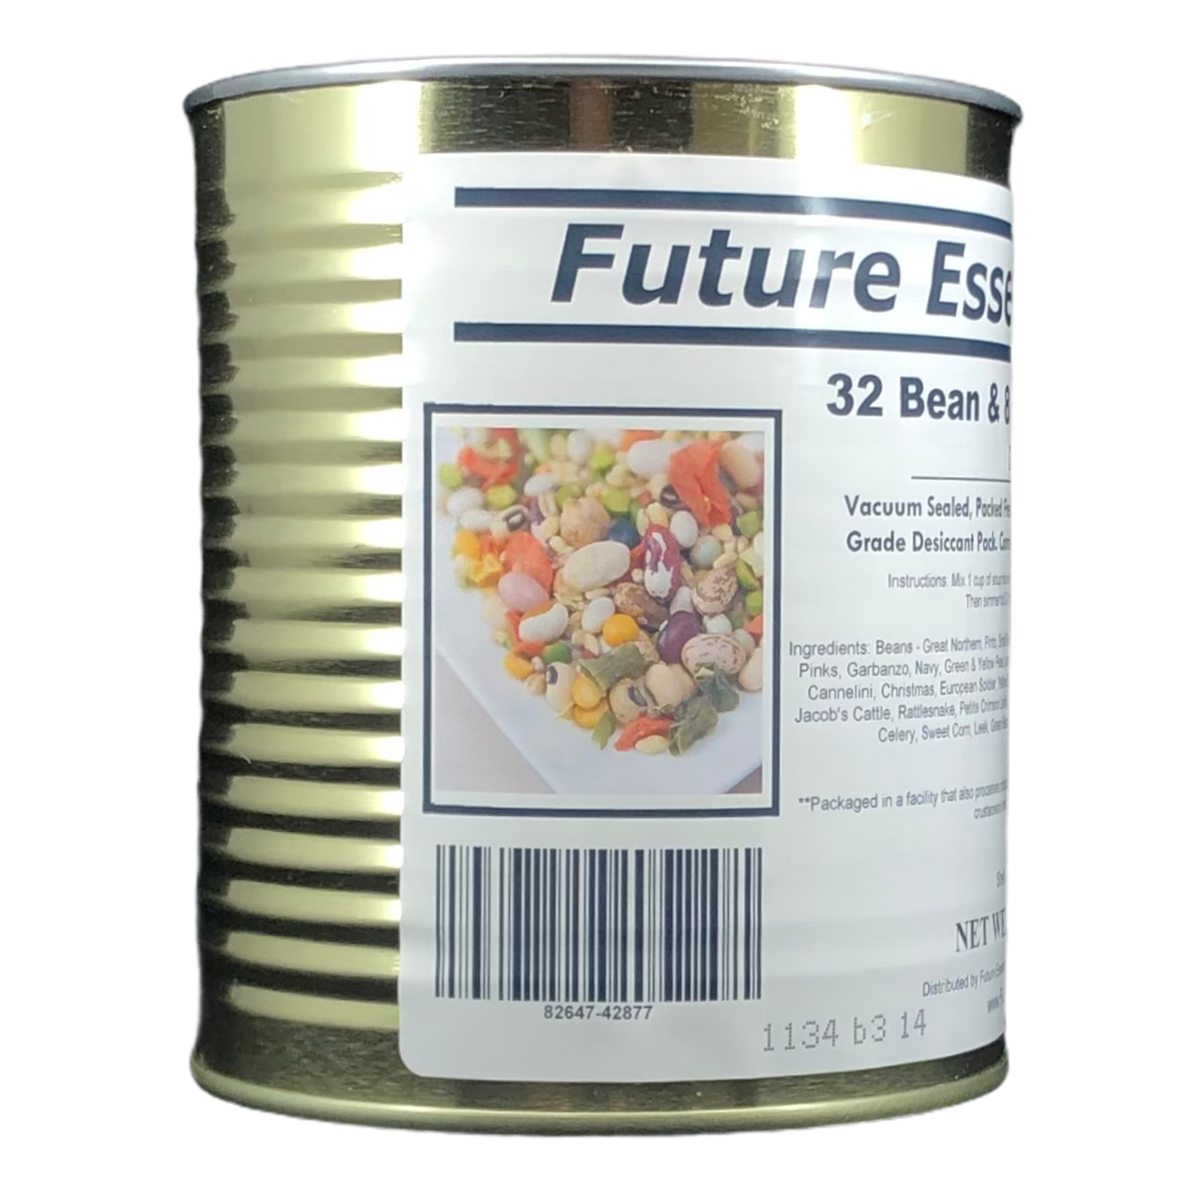 Future Essentials 32 Bean and 8 Vegetable Soup